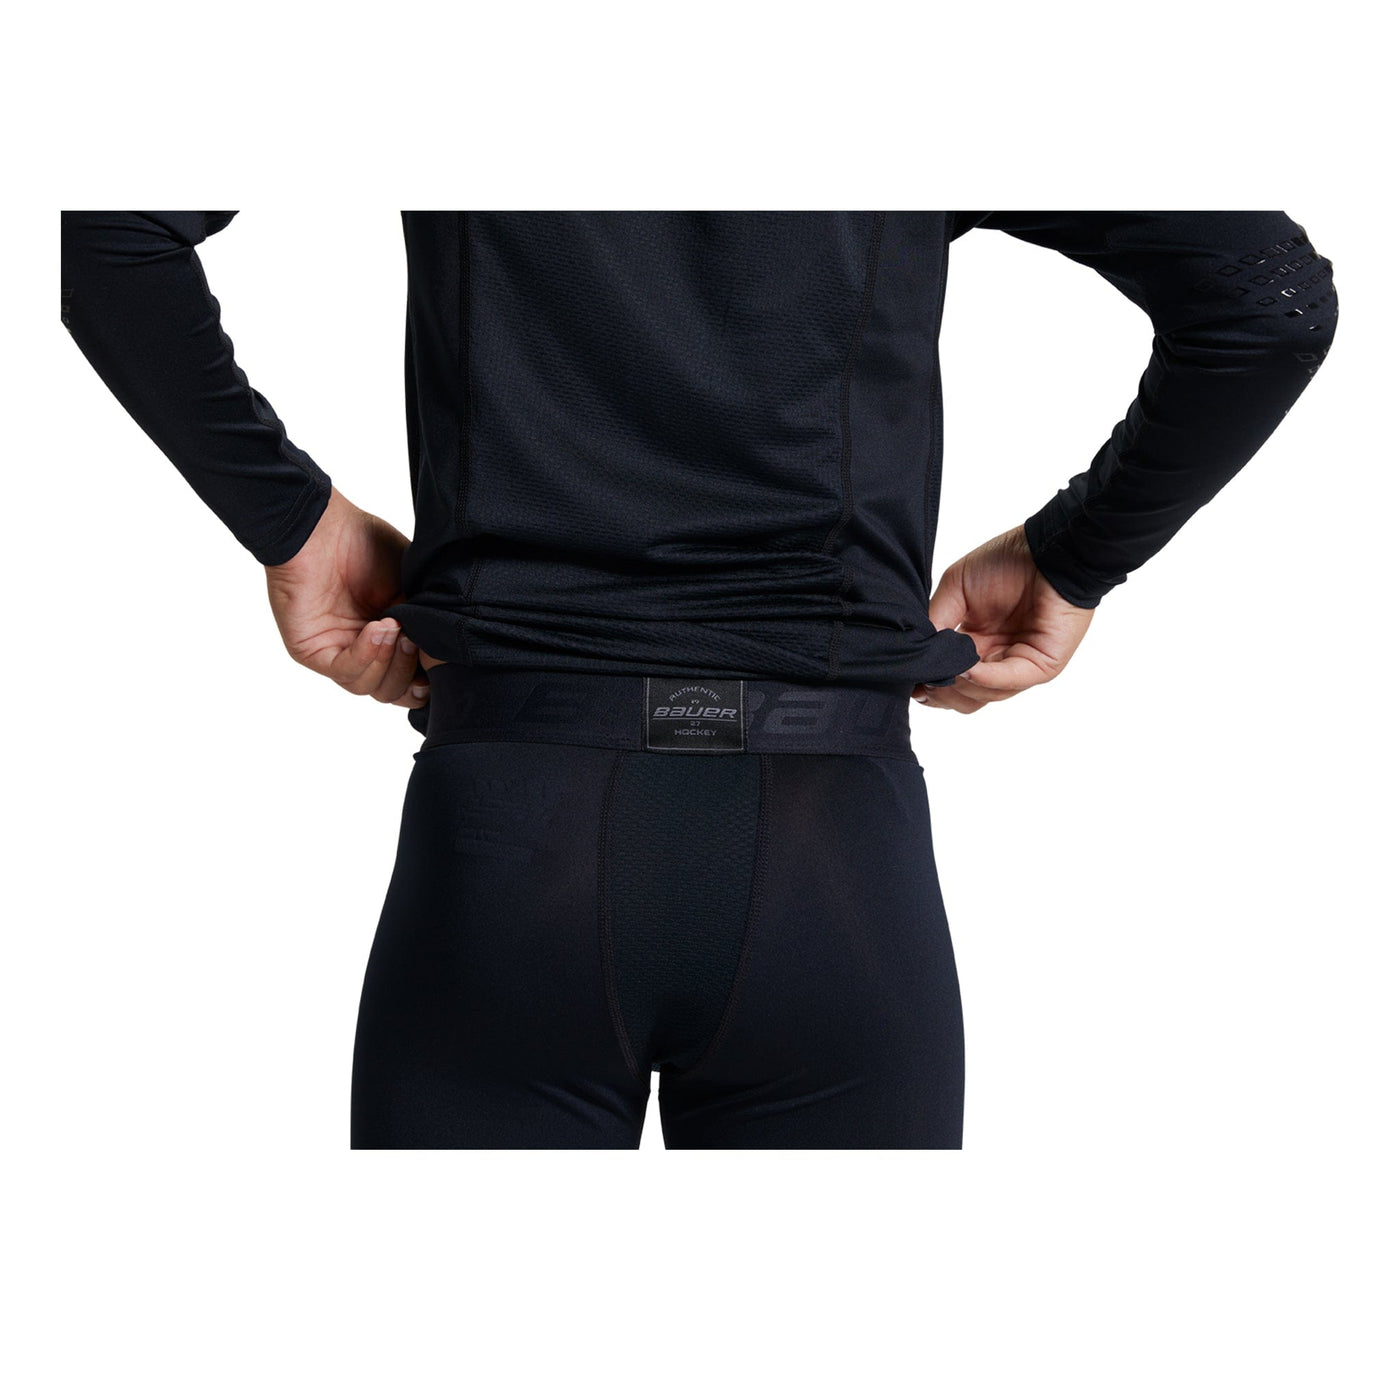 Bauer Pro Junior Baselayer Pants - The Hockey Shop Source For Sports